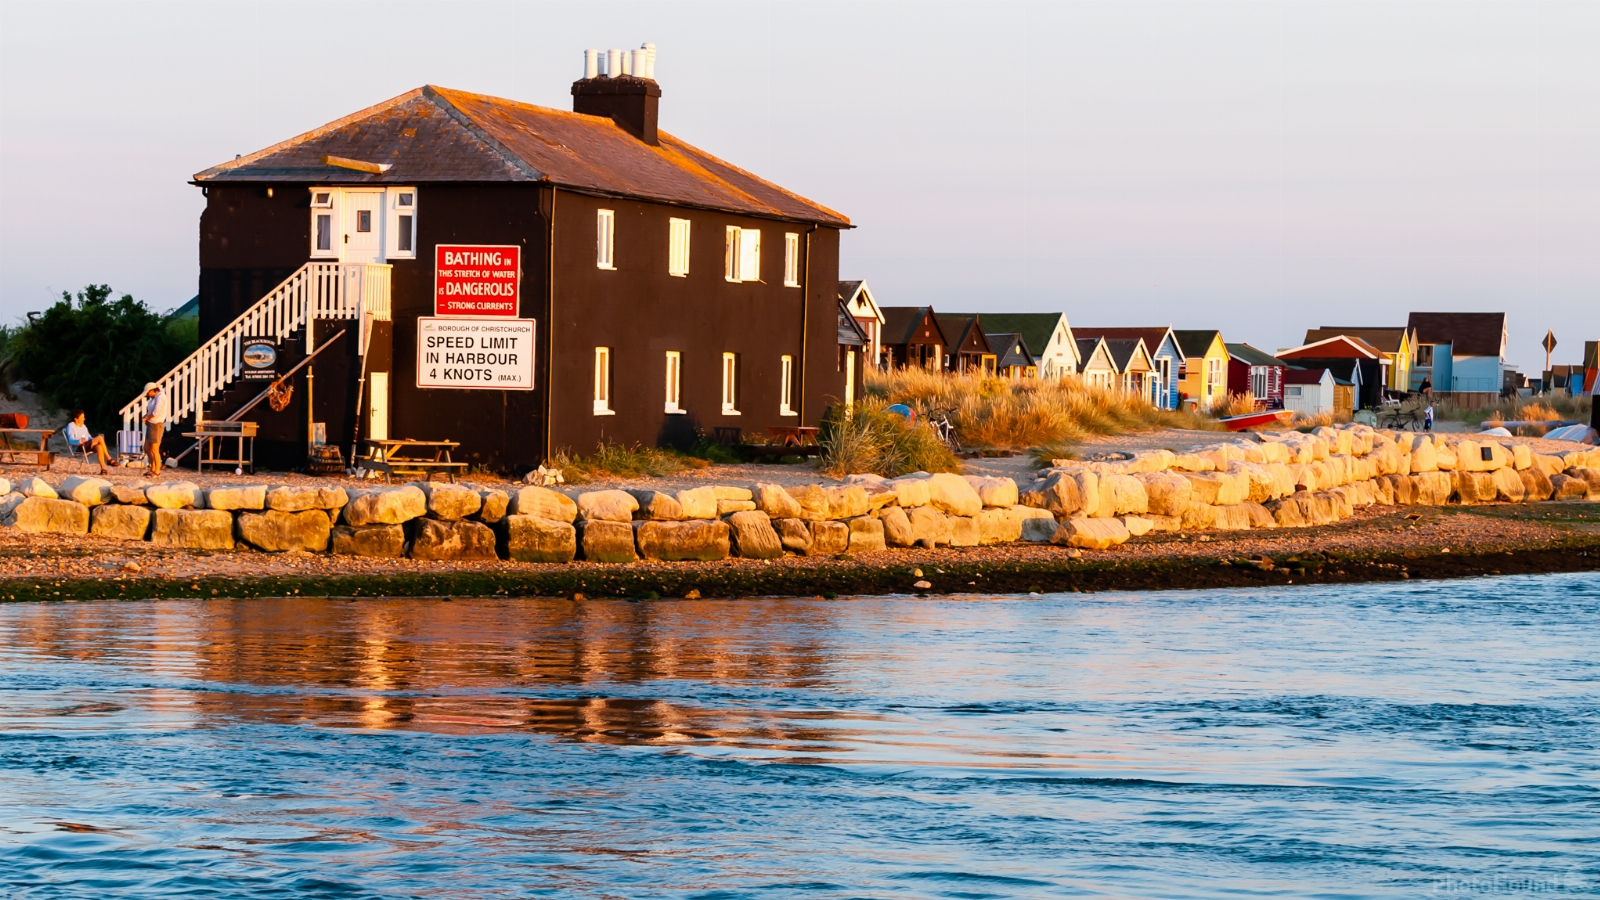 Image of Mudeford Quay by Brian Butcher